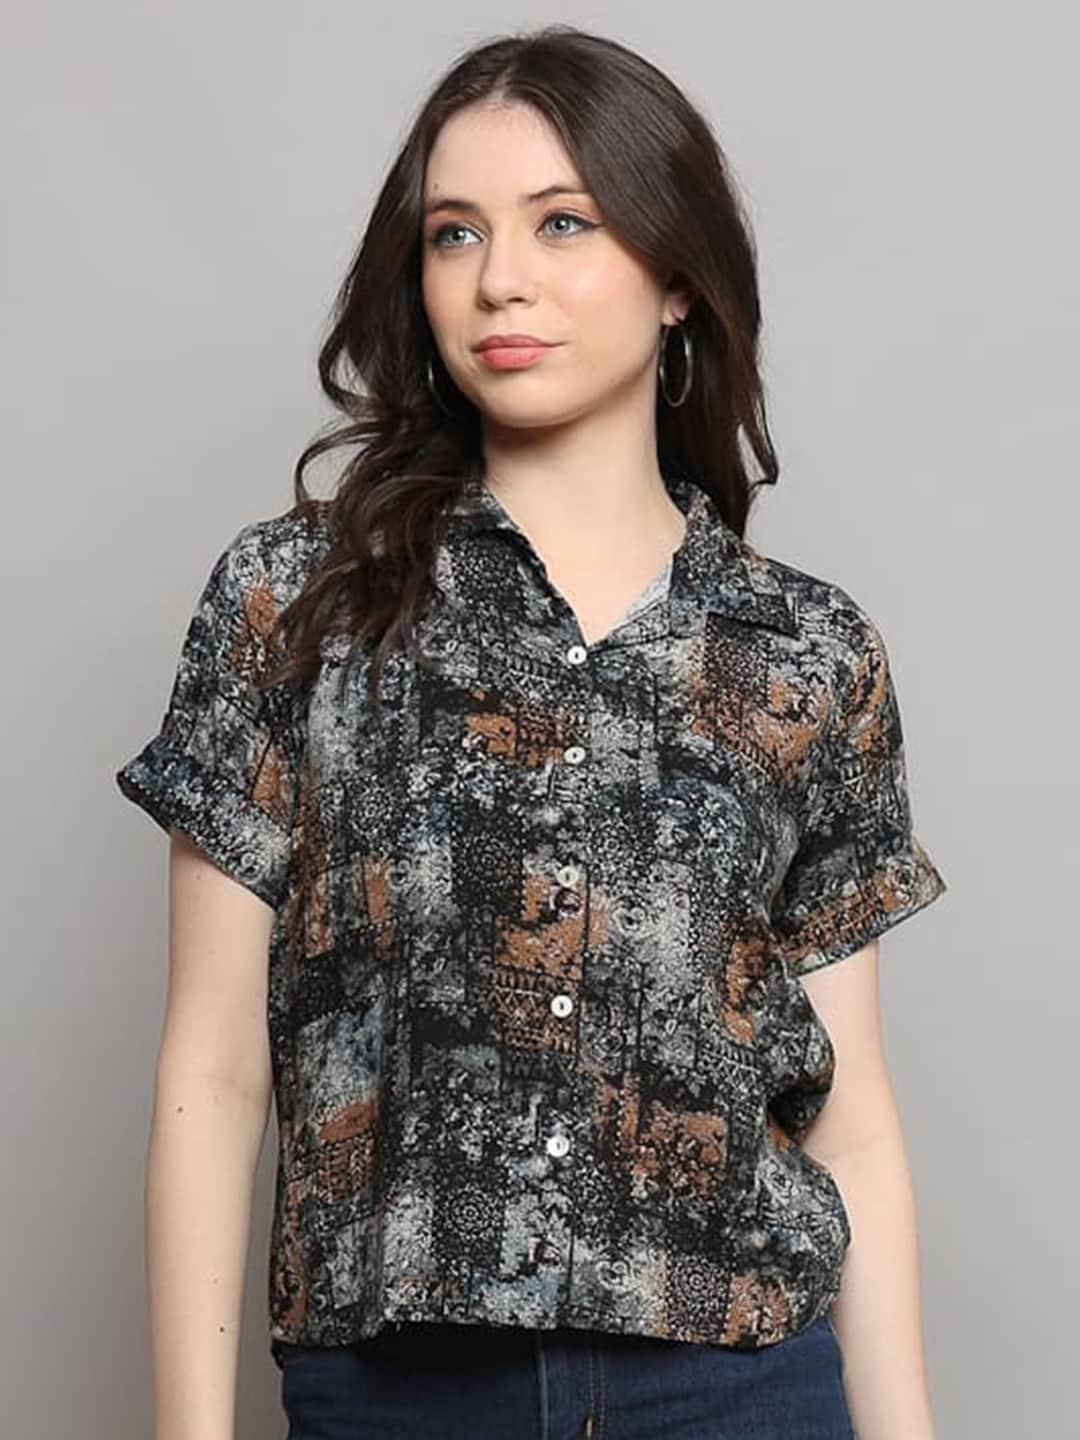 maiyee abstract printed extended sleeves shirt style top